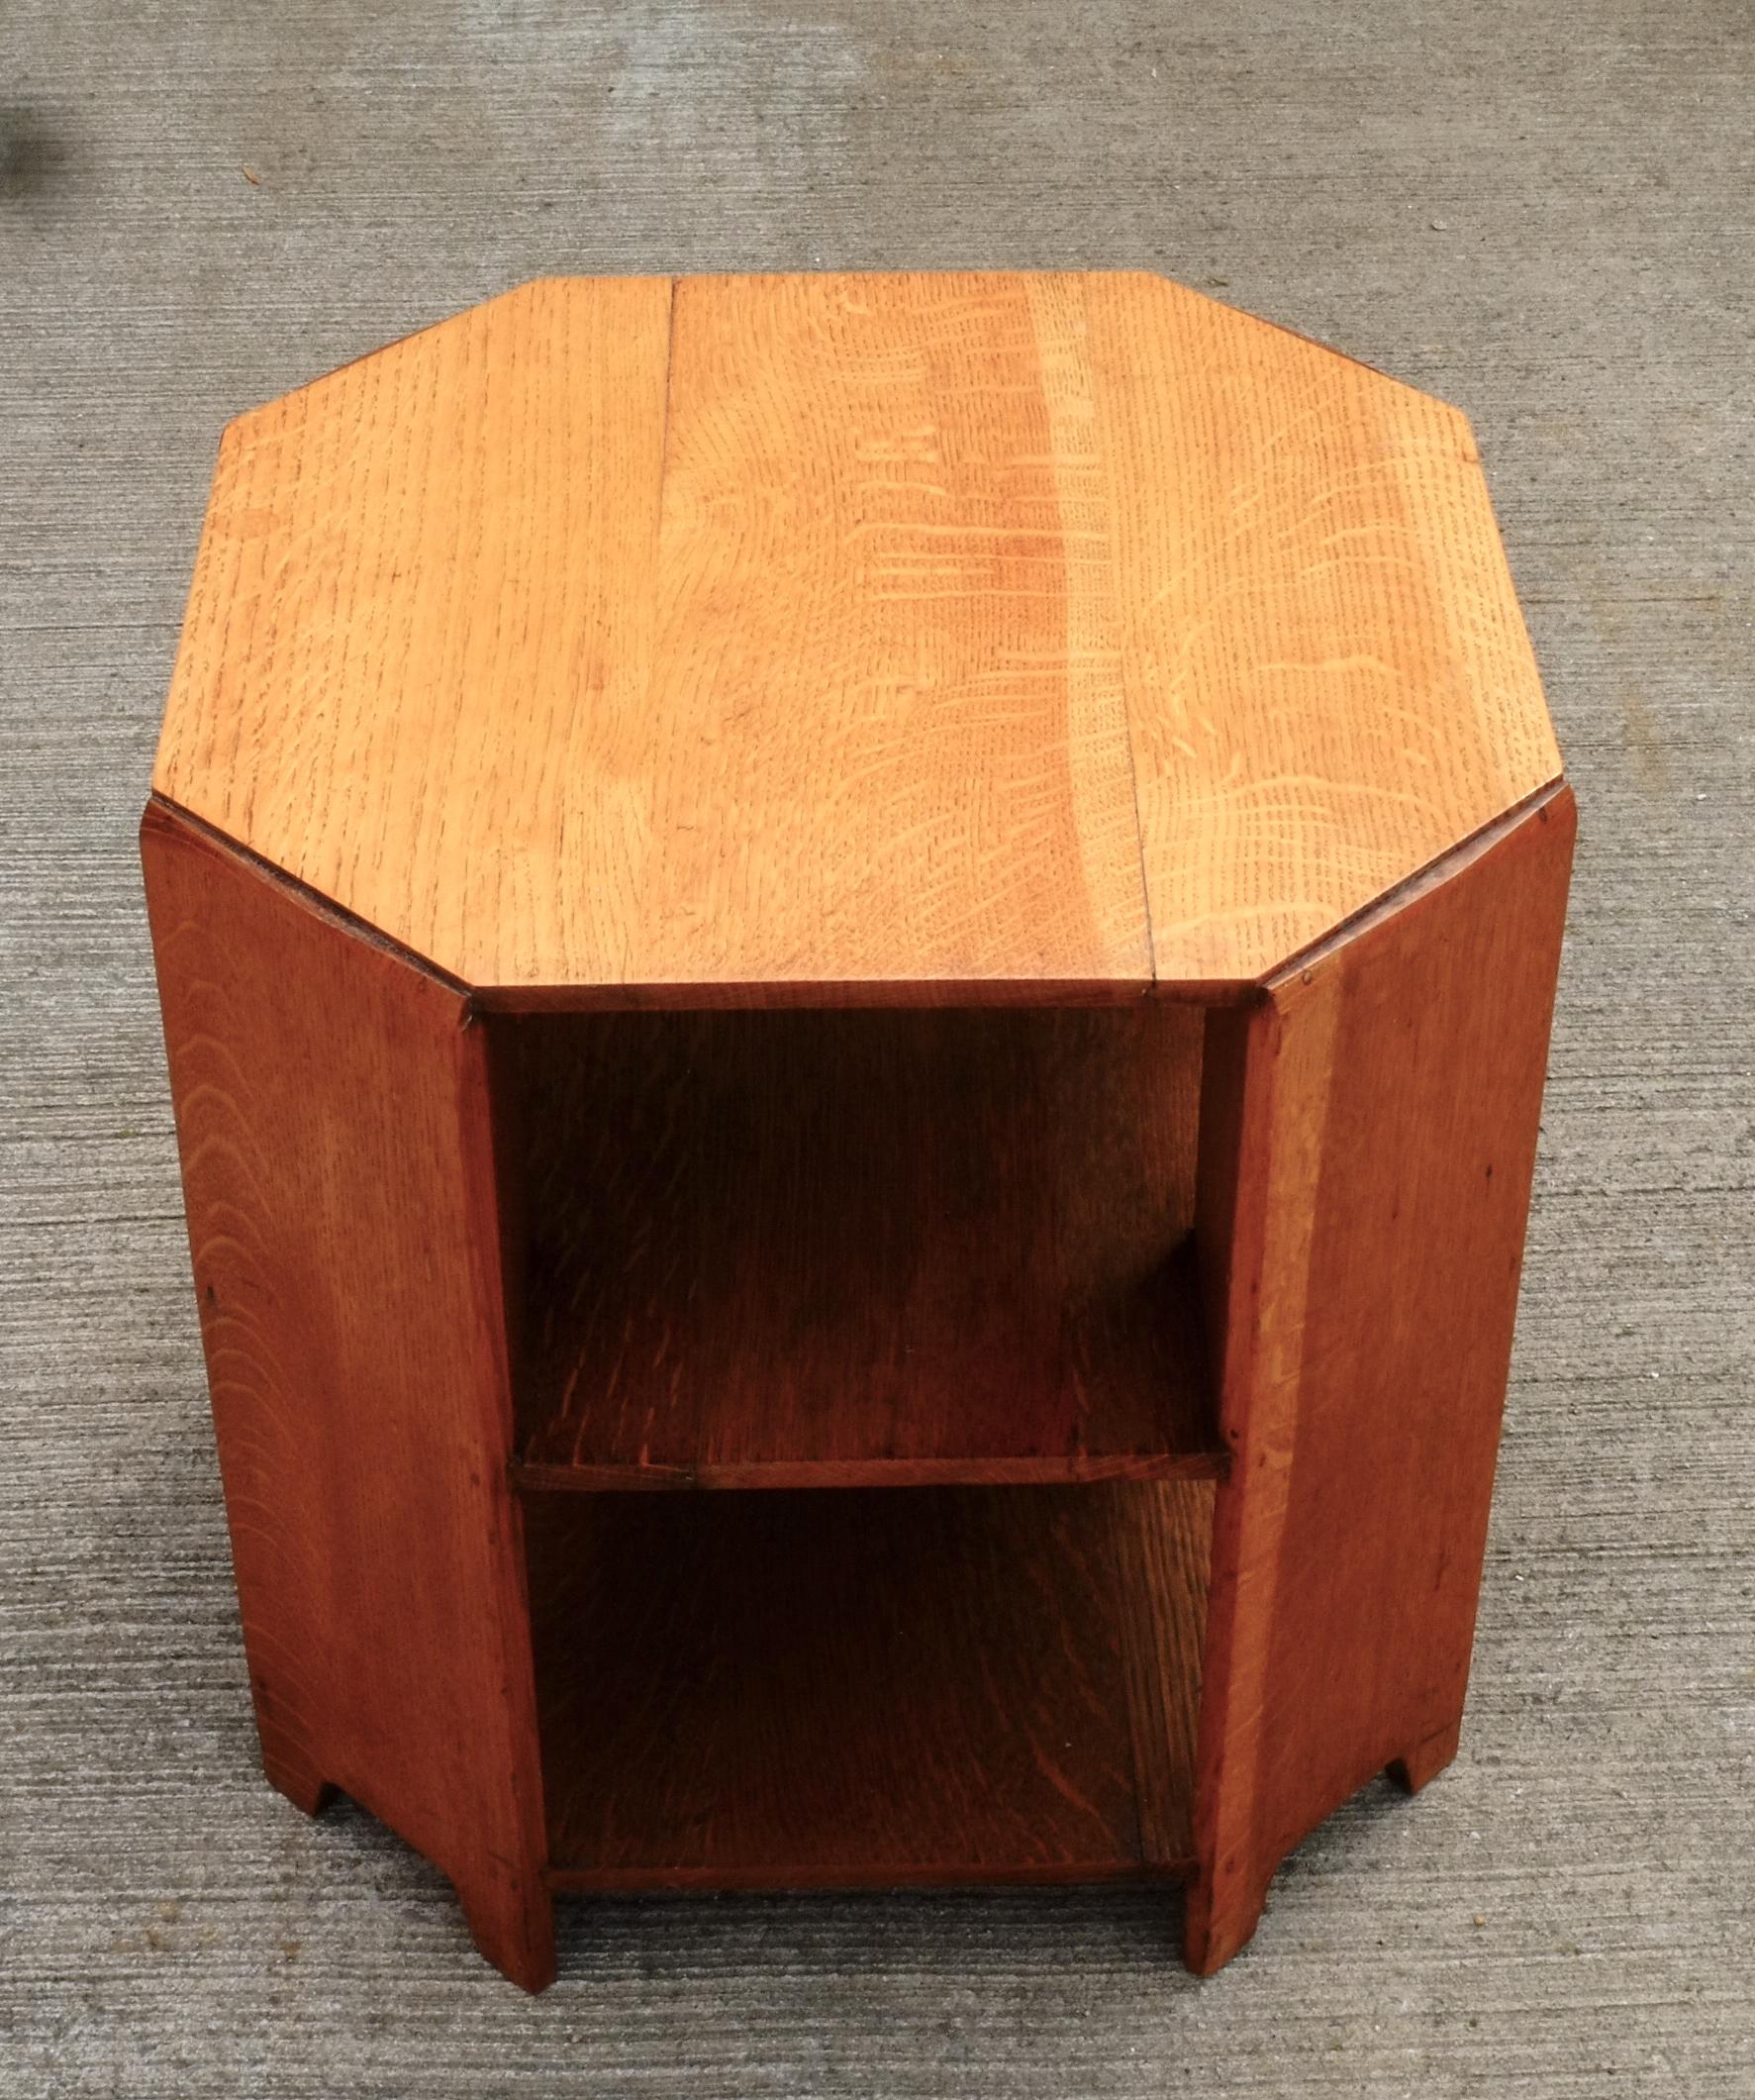 Mid-20th Century English Art Deco Octagonal Side Table in Solid Oak